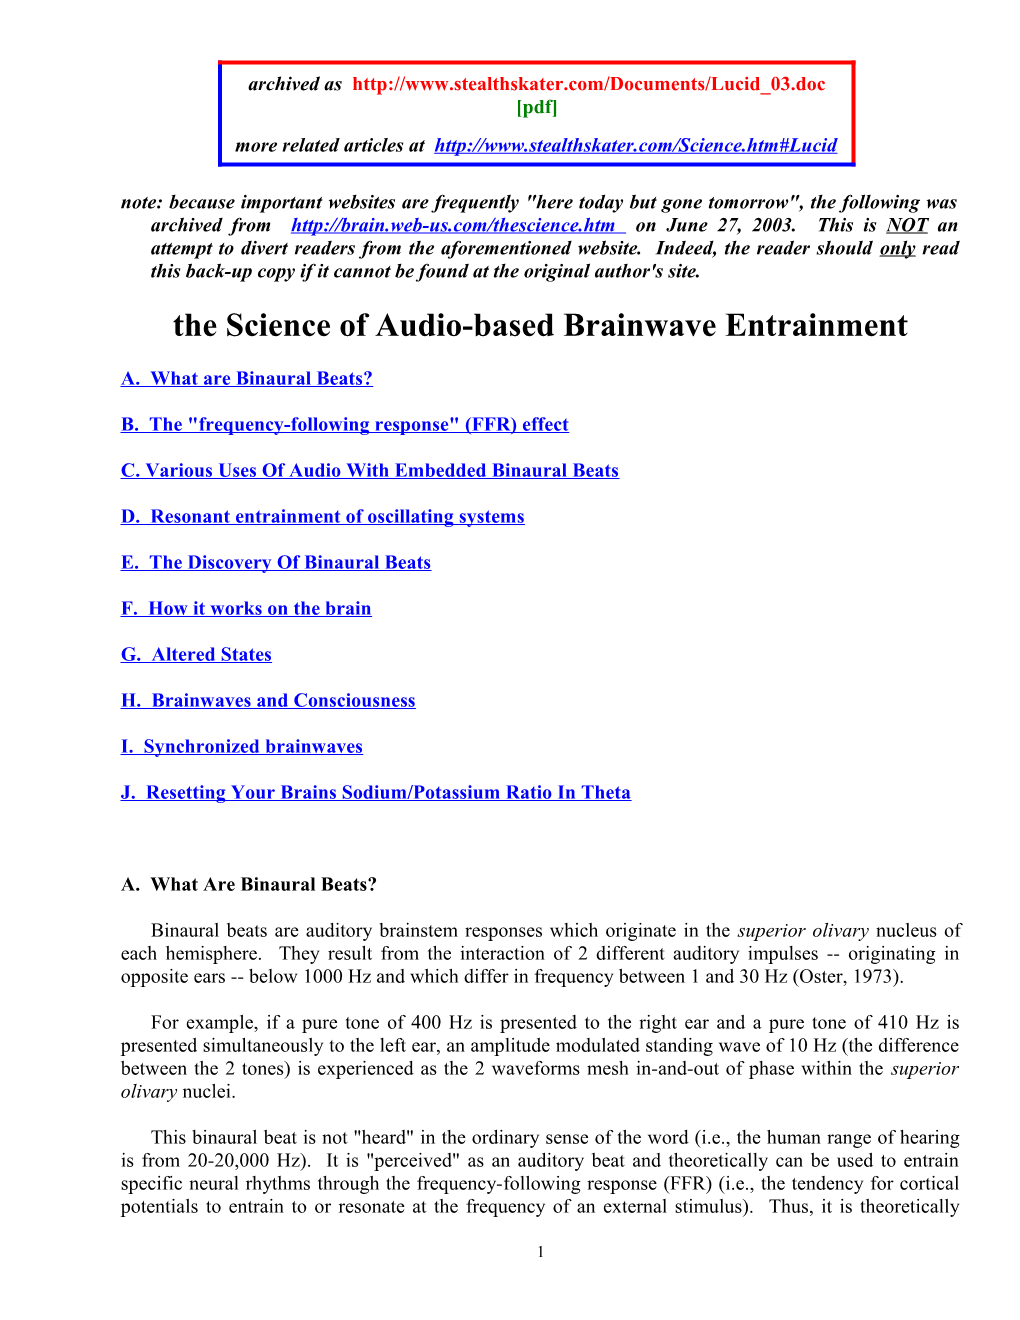 The Science of Audio-Based Brainwave Entrainment